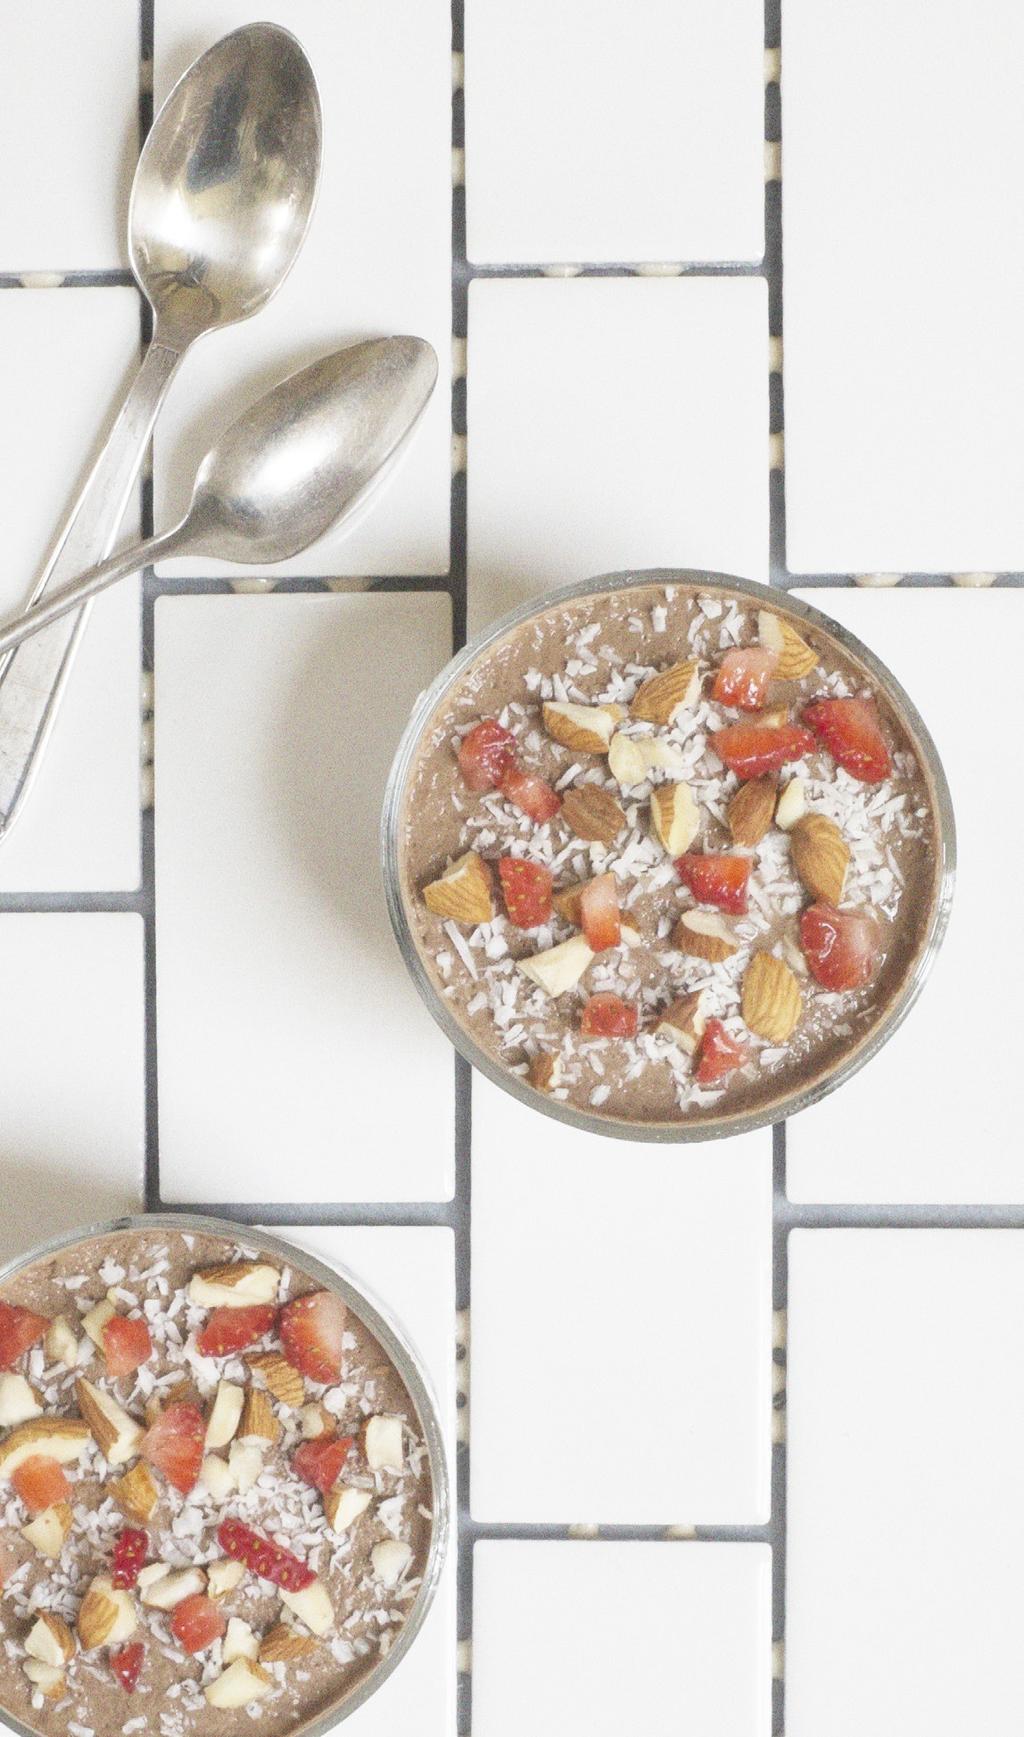 Chia Pudding 1 serving of PW1 Chocolate, Vanilla or Blackcurrant 1 cup (240ml) almond or coconut milk 5 tbsp chia seeds Optional toppings: Fresh berries, shredded coconut, chopped almonds.